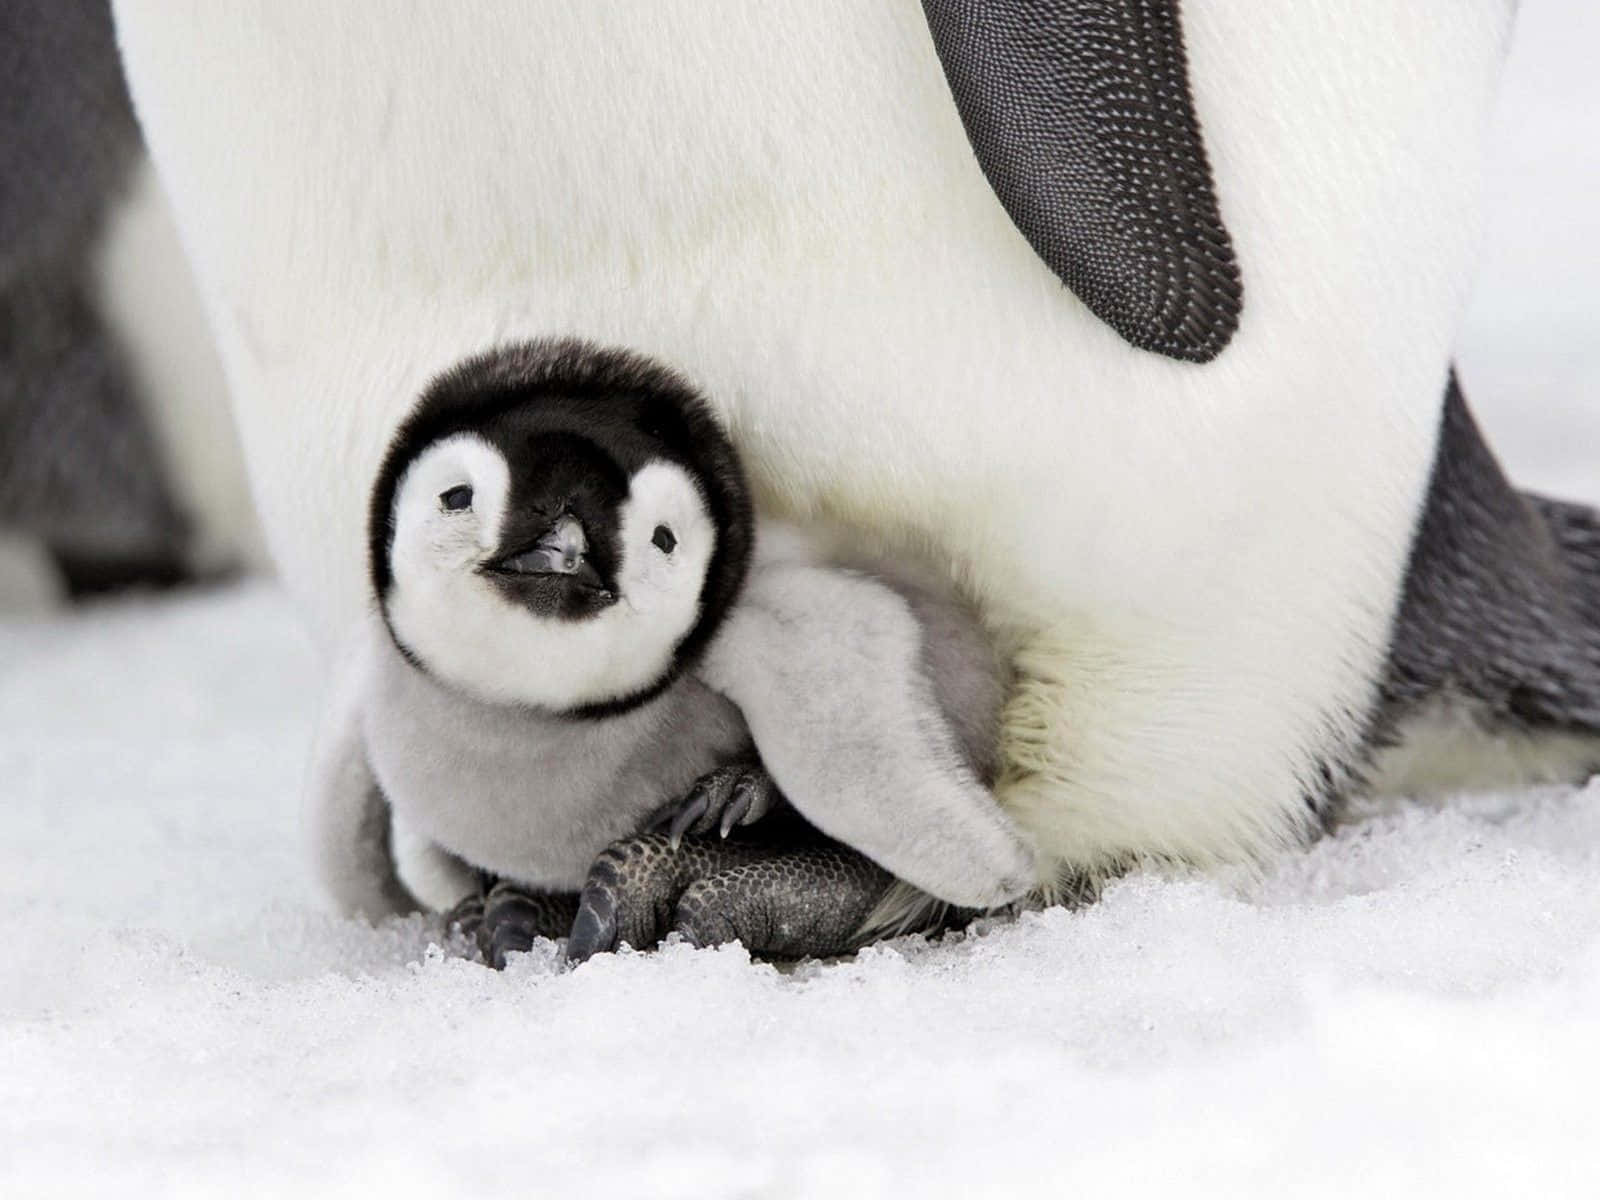 Adorable Penguin Enjoys the Winter Weather